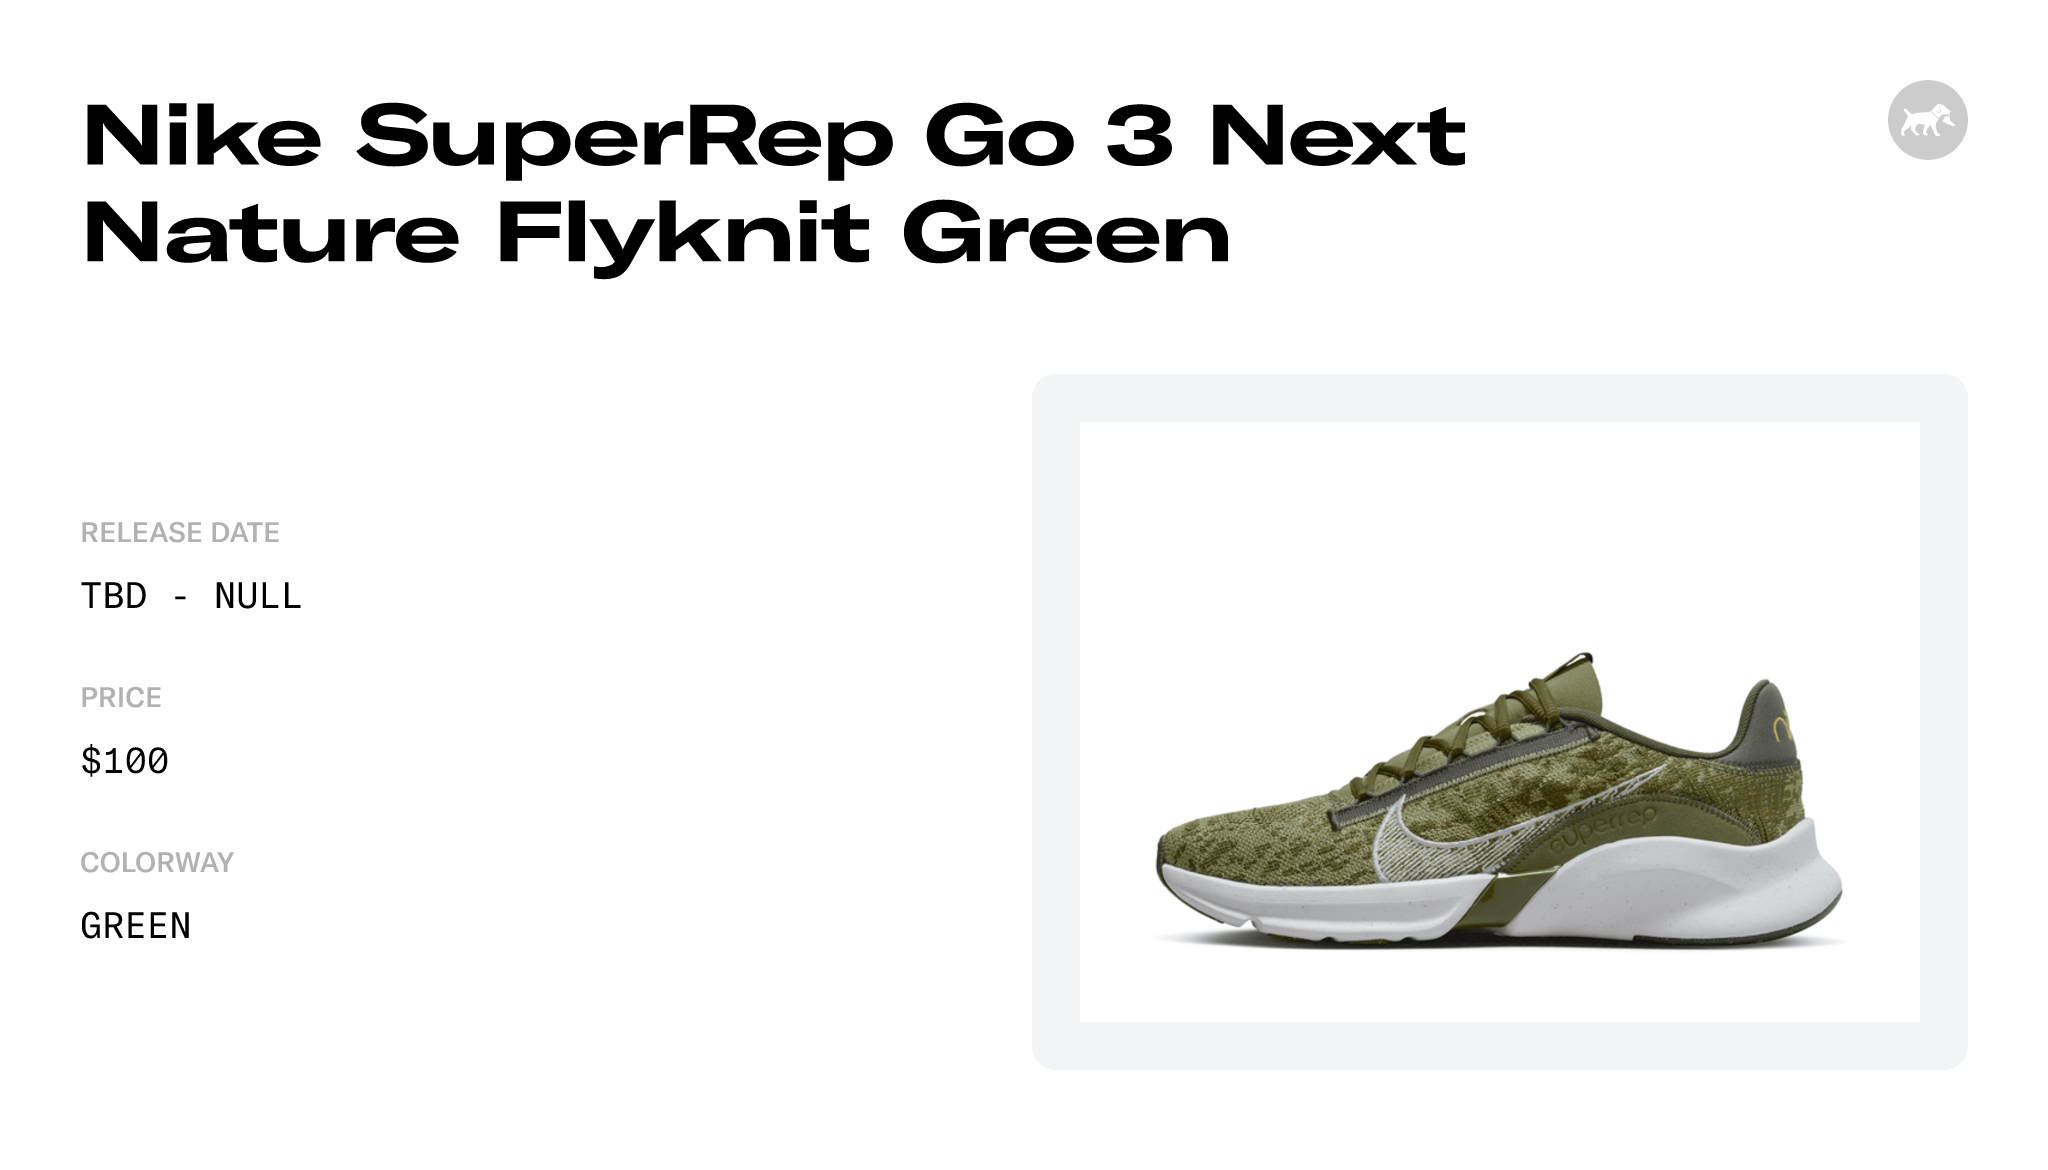 Nike SuperRep Go 3 Next Nature Flyknit Green - DH3394-300 Raffles and ...